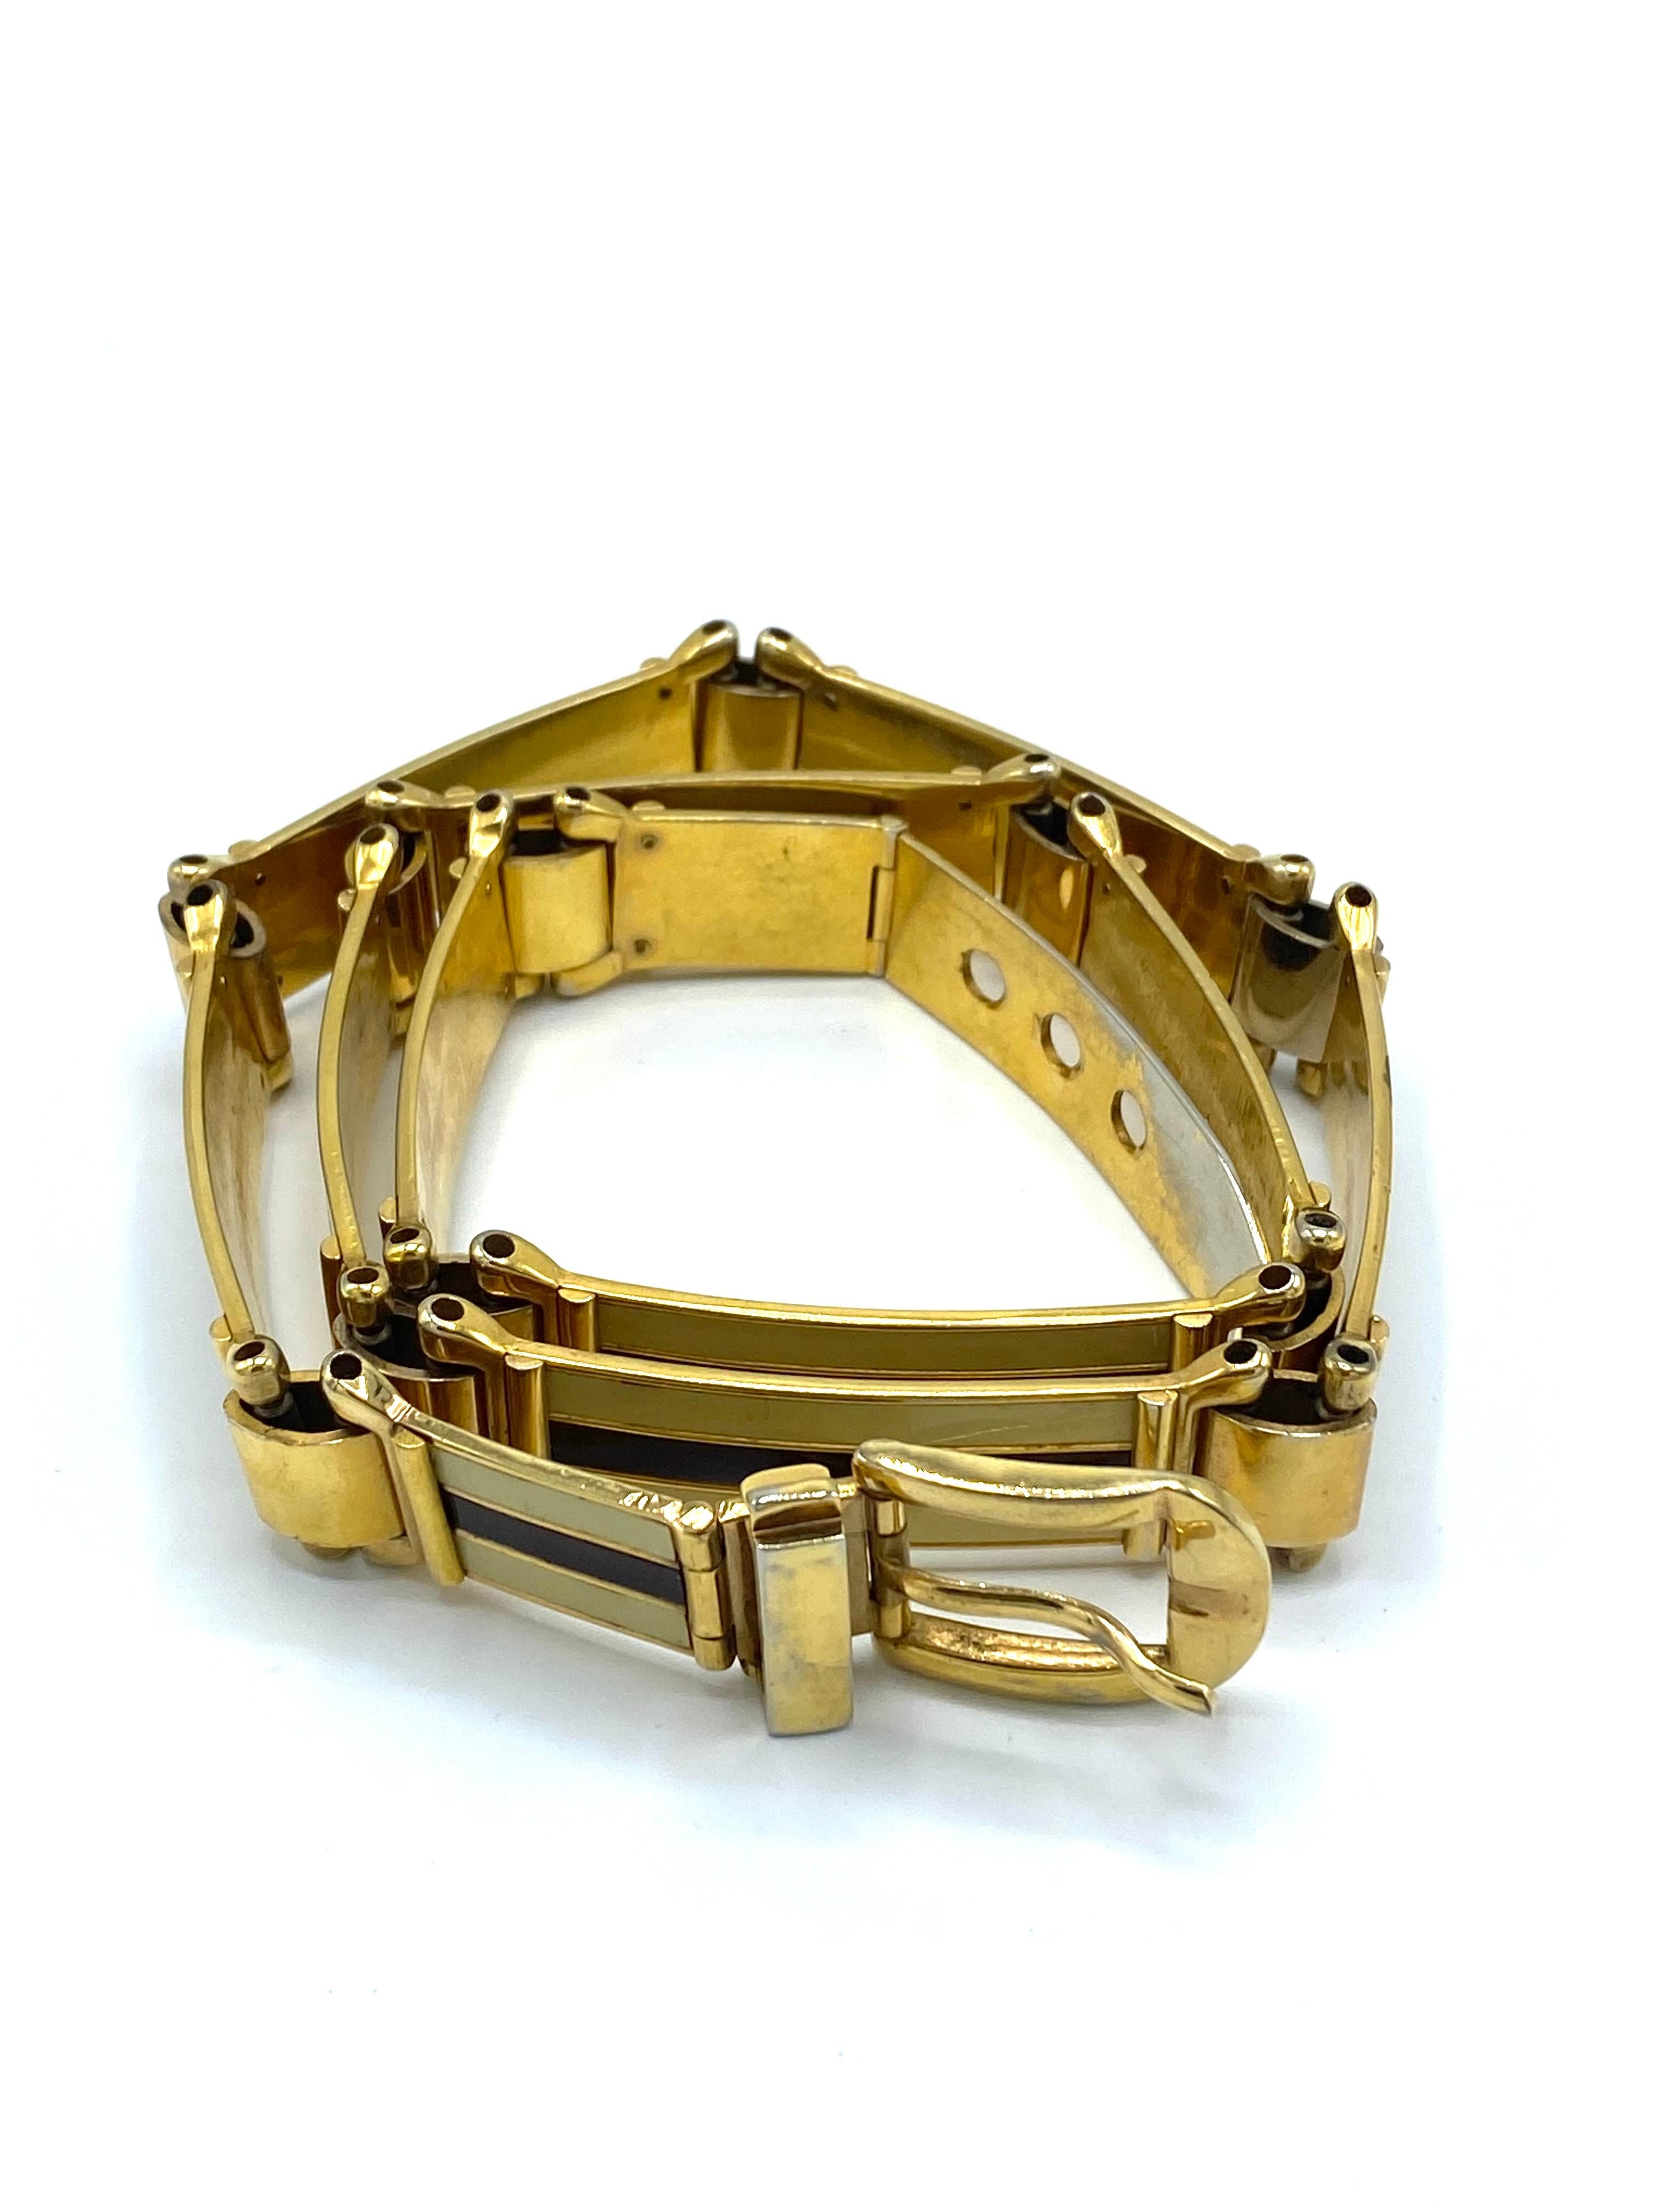 Product details:

The belt is made out of enamel and gold plated finish. It is stamped with Gucci Italy. It fits waist size from 30-31 inches. Made in Italy.
Measurements: 32 inches long and 5/8 inches wide.


